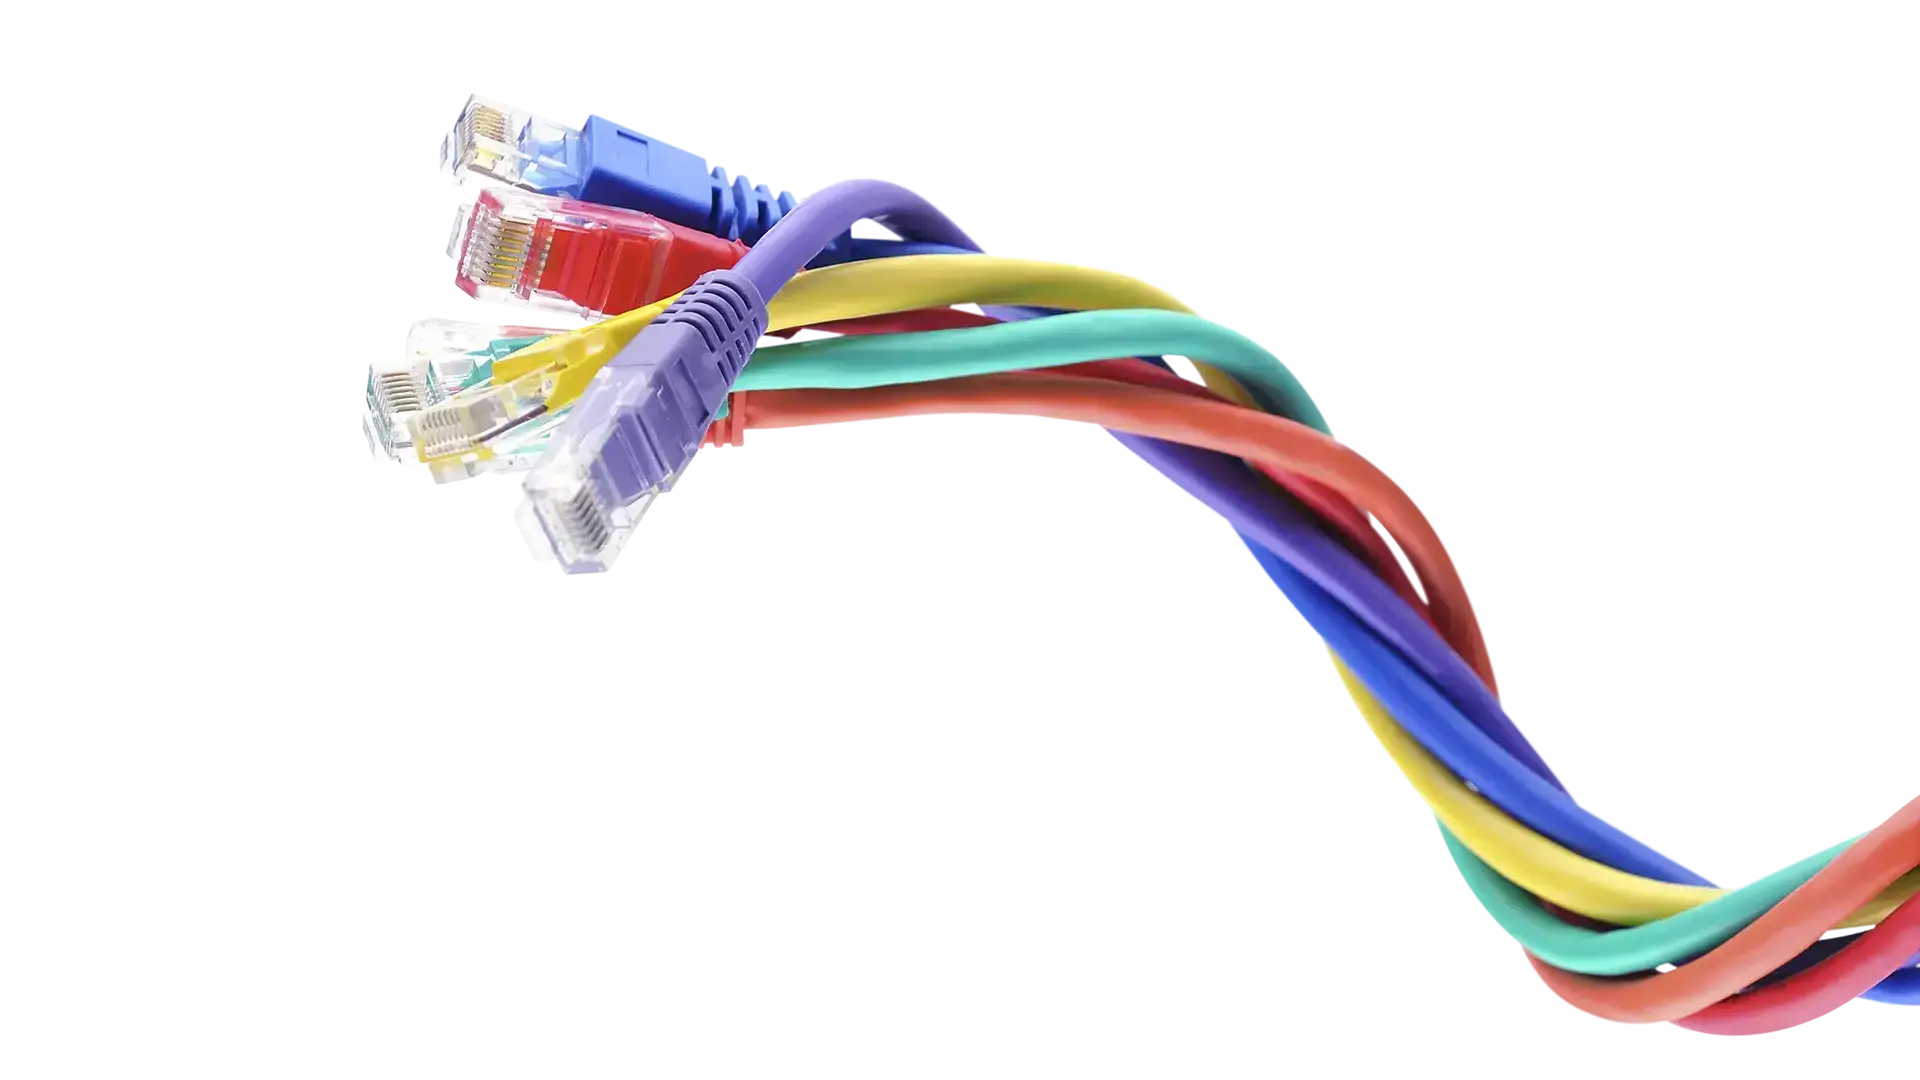 Multicolored cables in group